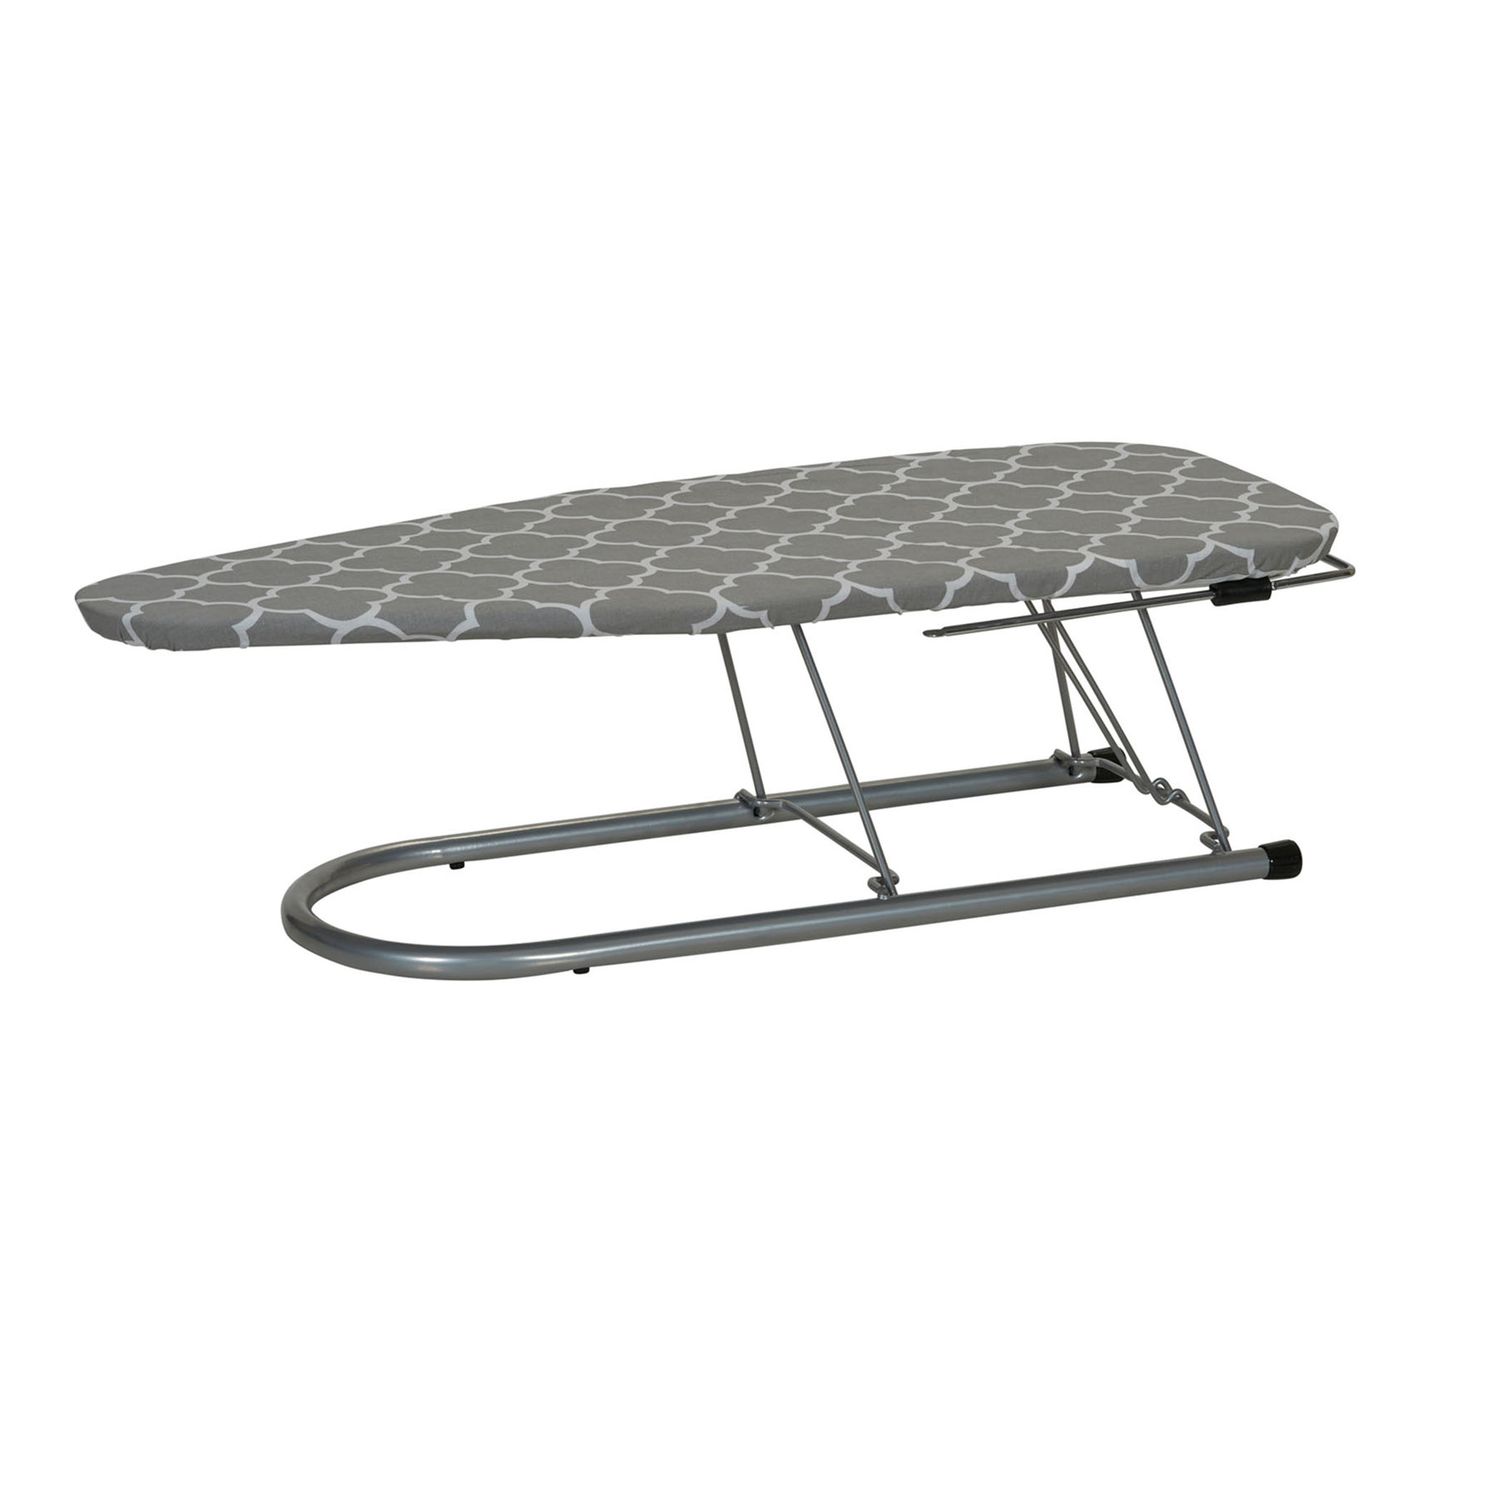 Image for Household Essentials Silver-Tone Tabletop Ironing Board at Kohl's.